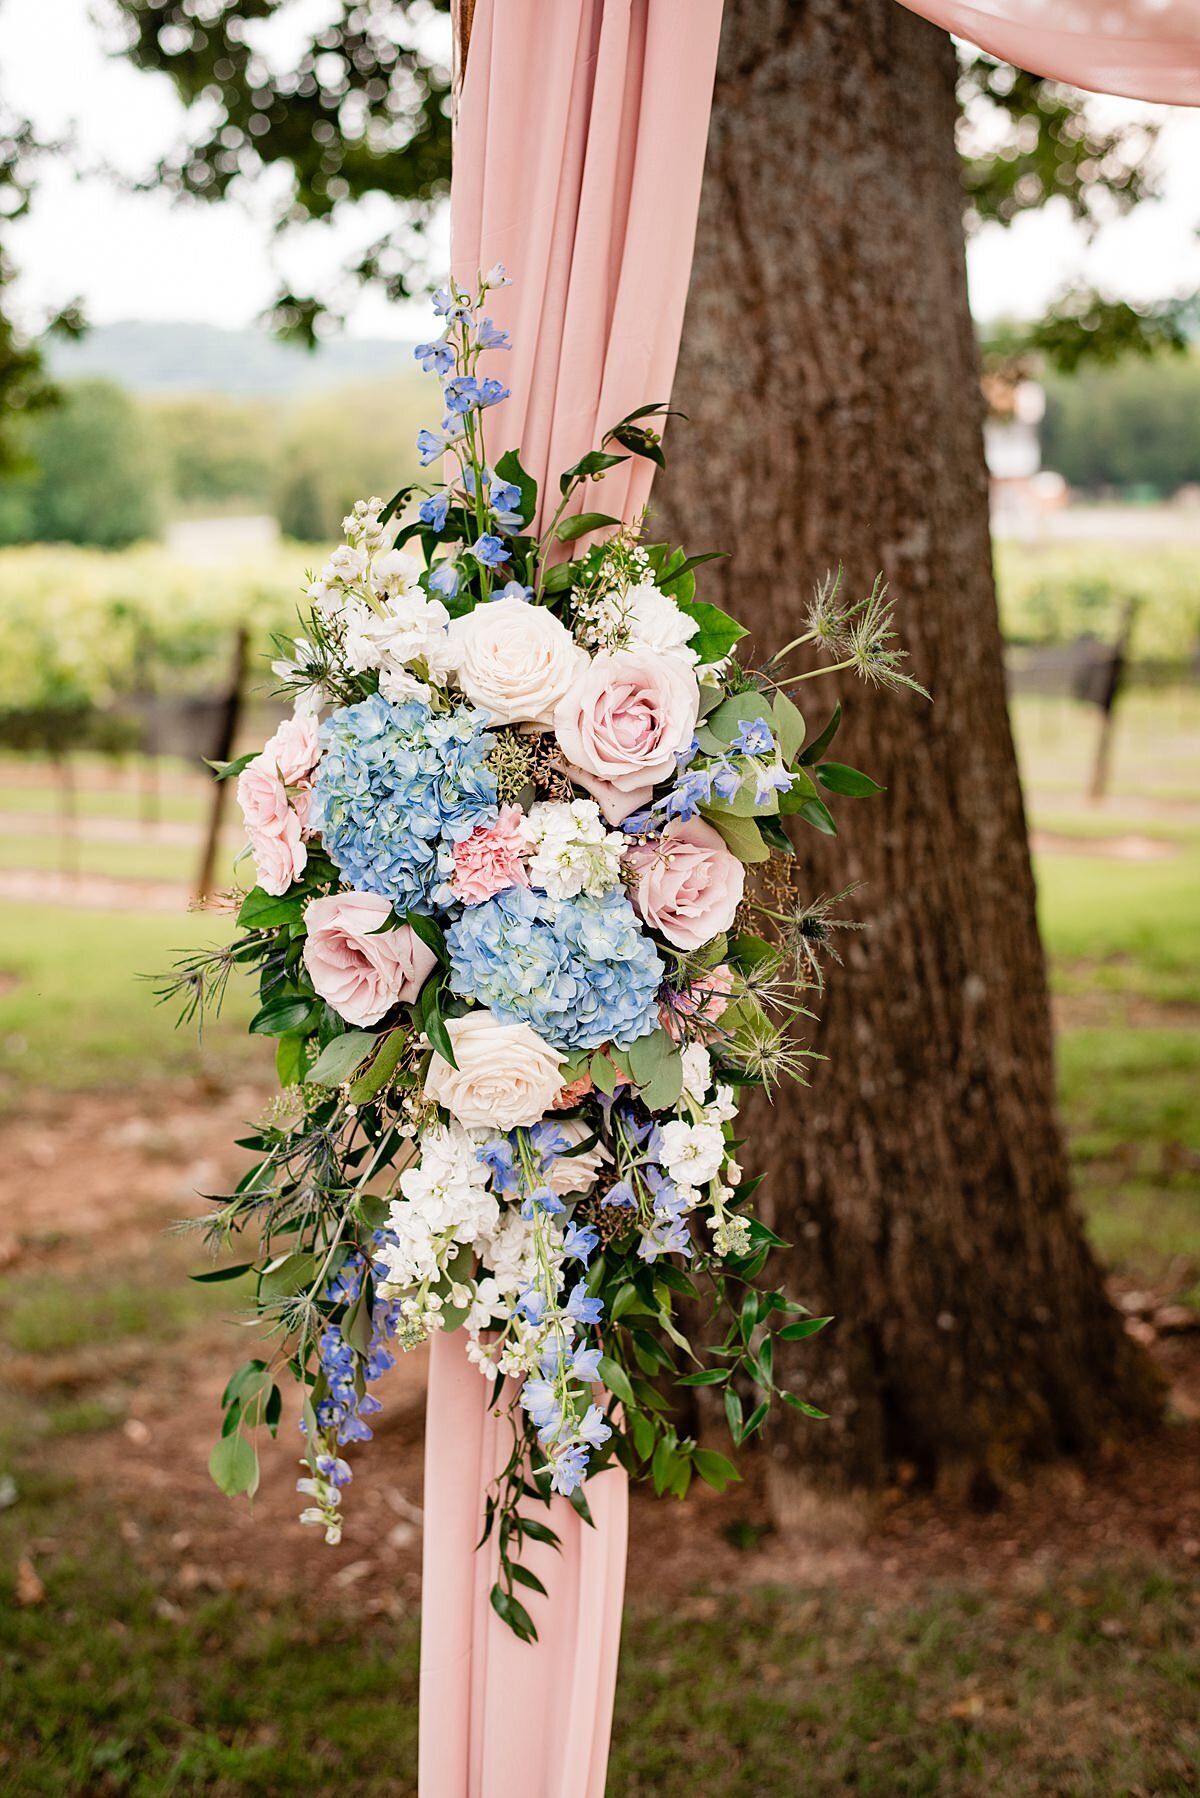 Wedding arbor decorated with sheer blush pink fabric and a large spray of blue hydrangea, blush roses, white roses, white hydrangea, greenery and eucalyptus.